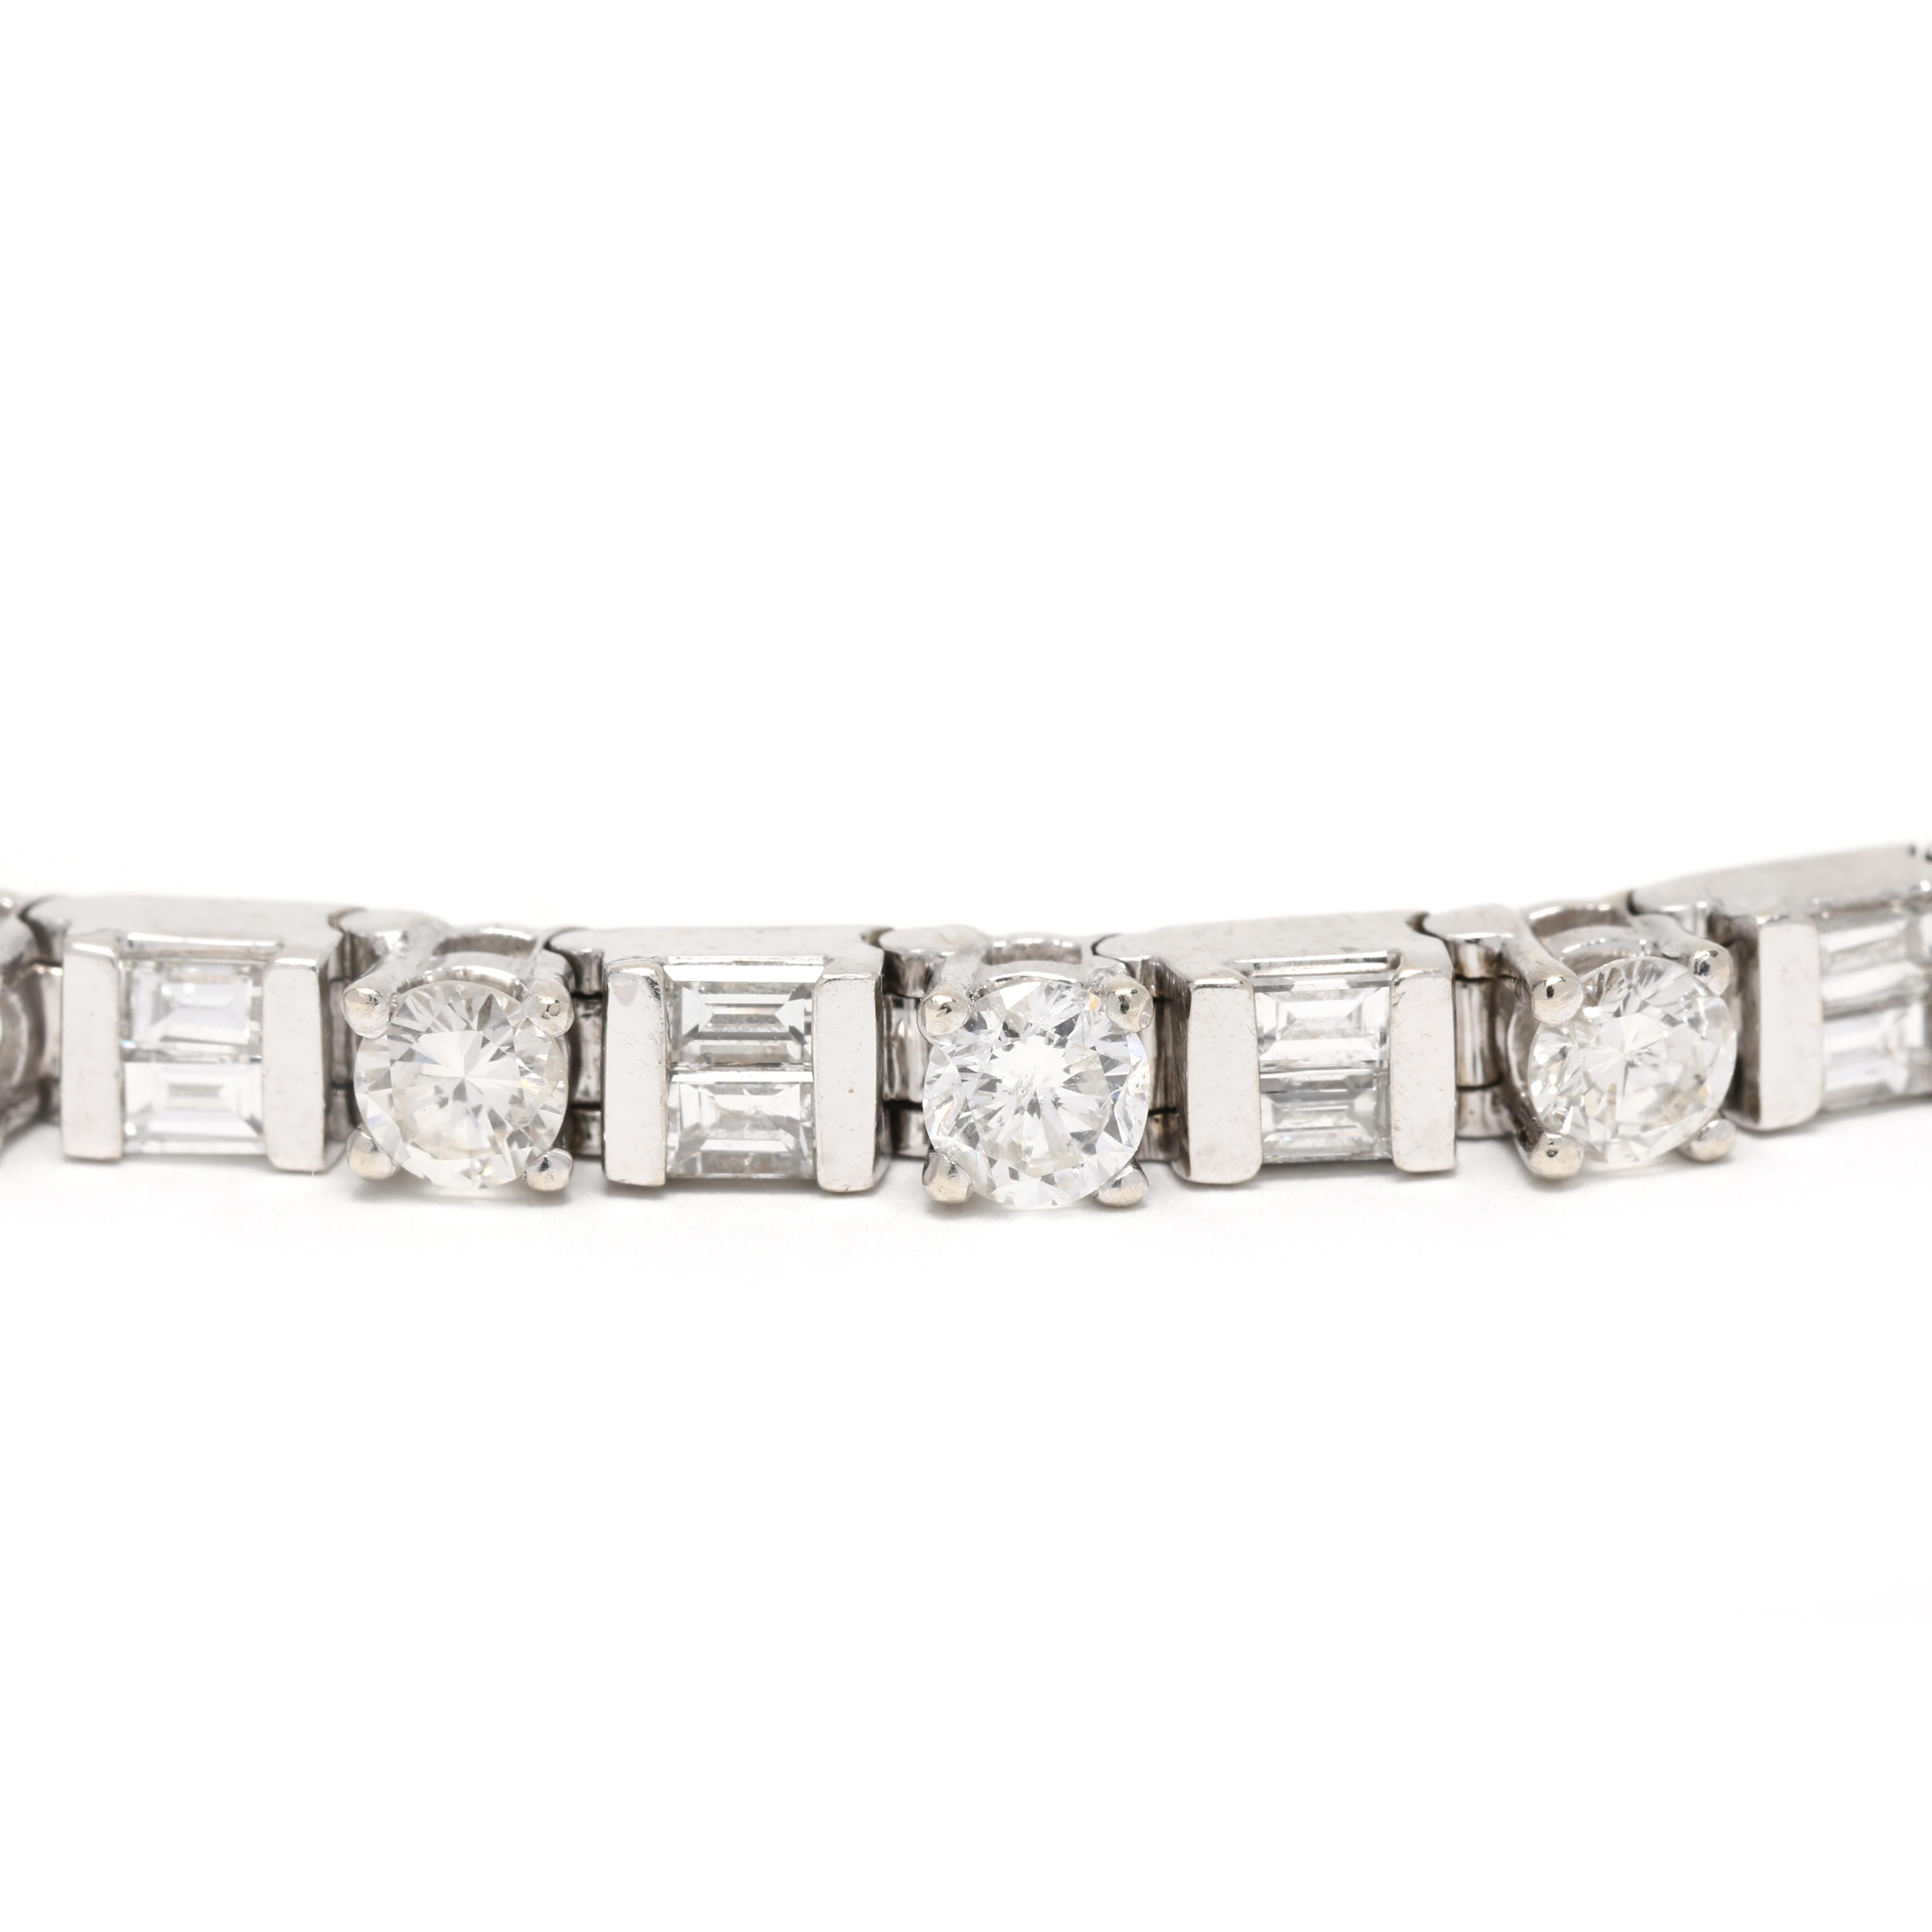 This stunning 5.50ctw diamond tennis bracelet is the perfect way to make a statement. Crafted from 14K white gold in a length of 7 inches, this bracelet features a dazzling line of round and baguette diamonds that sparkle and shine. This beautiful